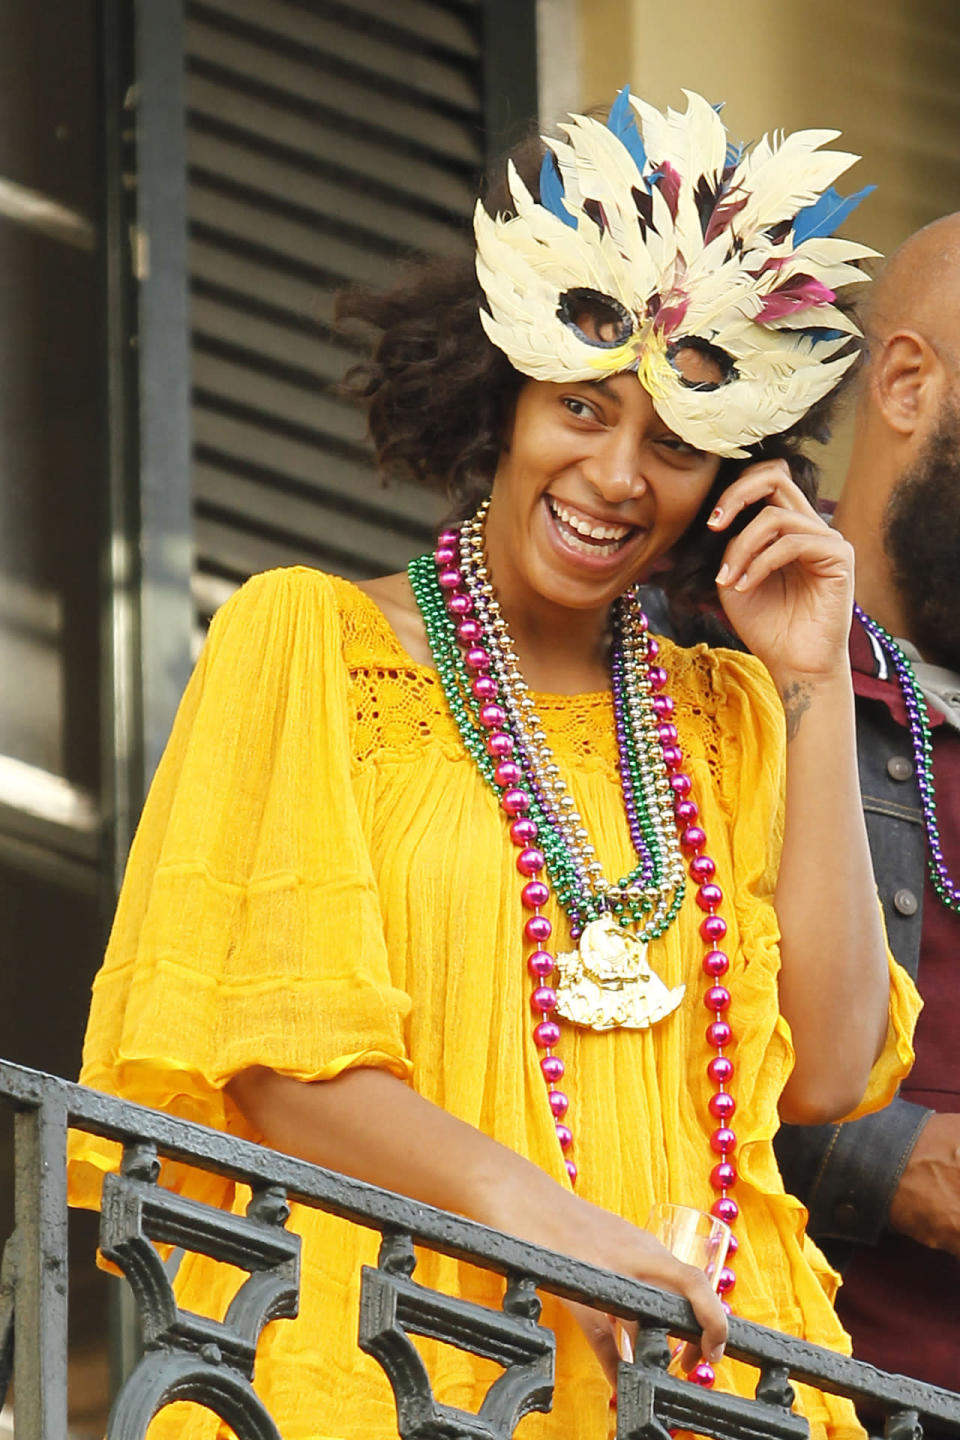 Solange turned up a parade in New Orleans on Jan. 31, 2016